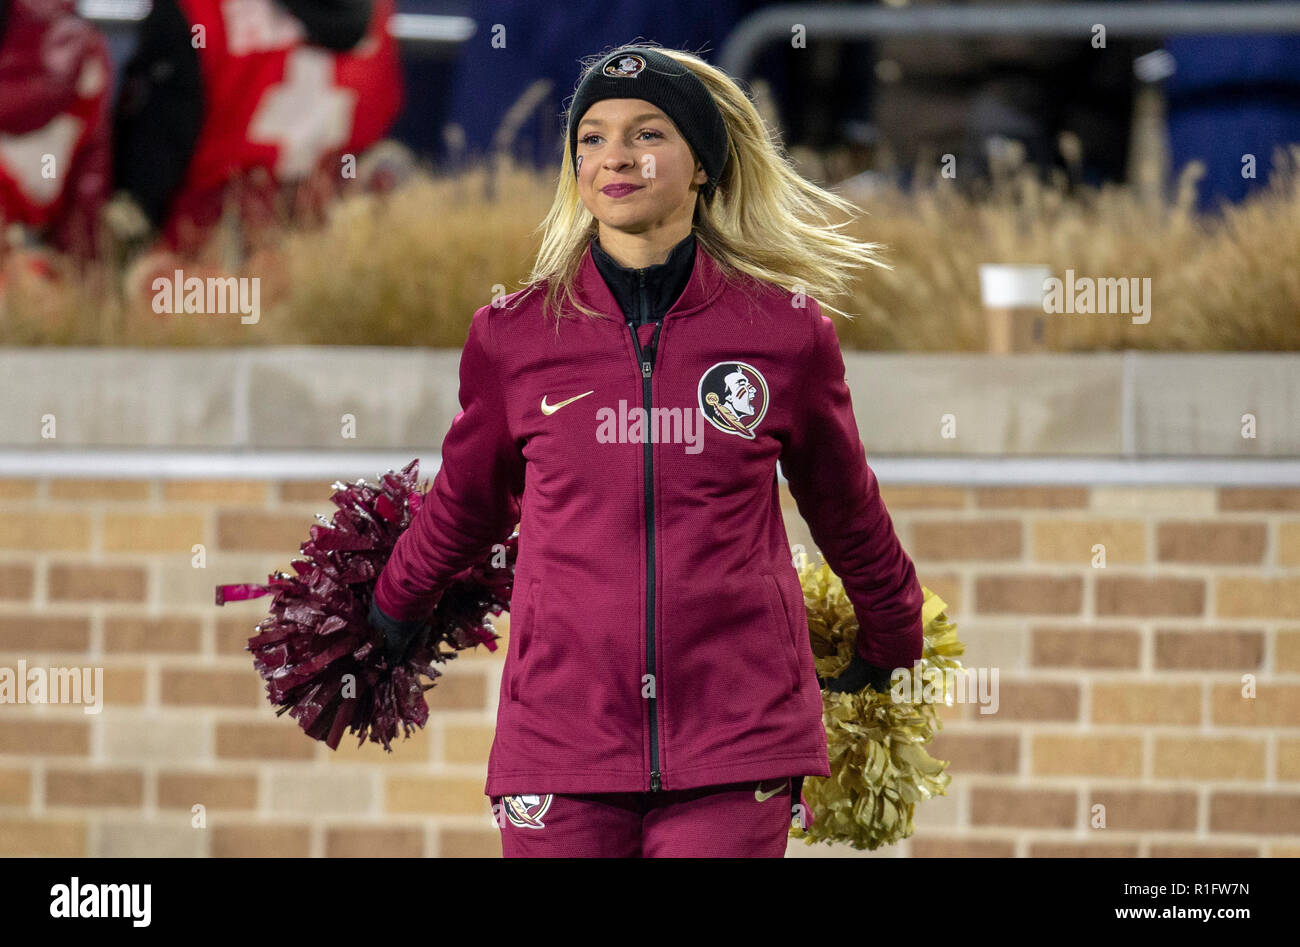 South Bend, Indiana, USA. 10th Nov, 2018. Florida State cheerleader performs during NCAA football game action between the Florida State Seminoles and the Notre Dame Fighting Irish at Notre Dame Stadium in South Bend, Indiana. Notre Dame defeated Florida State 42-13. John Mersits/CSM/Alamy Live News Stock Photo